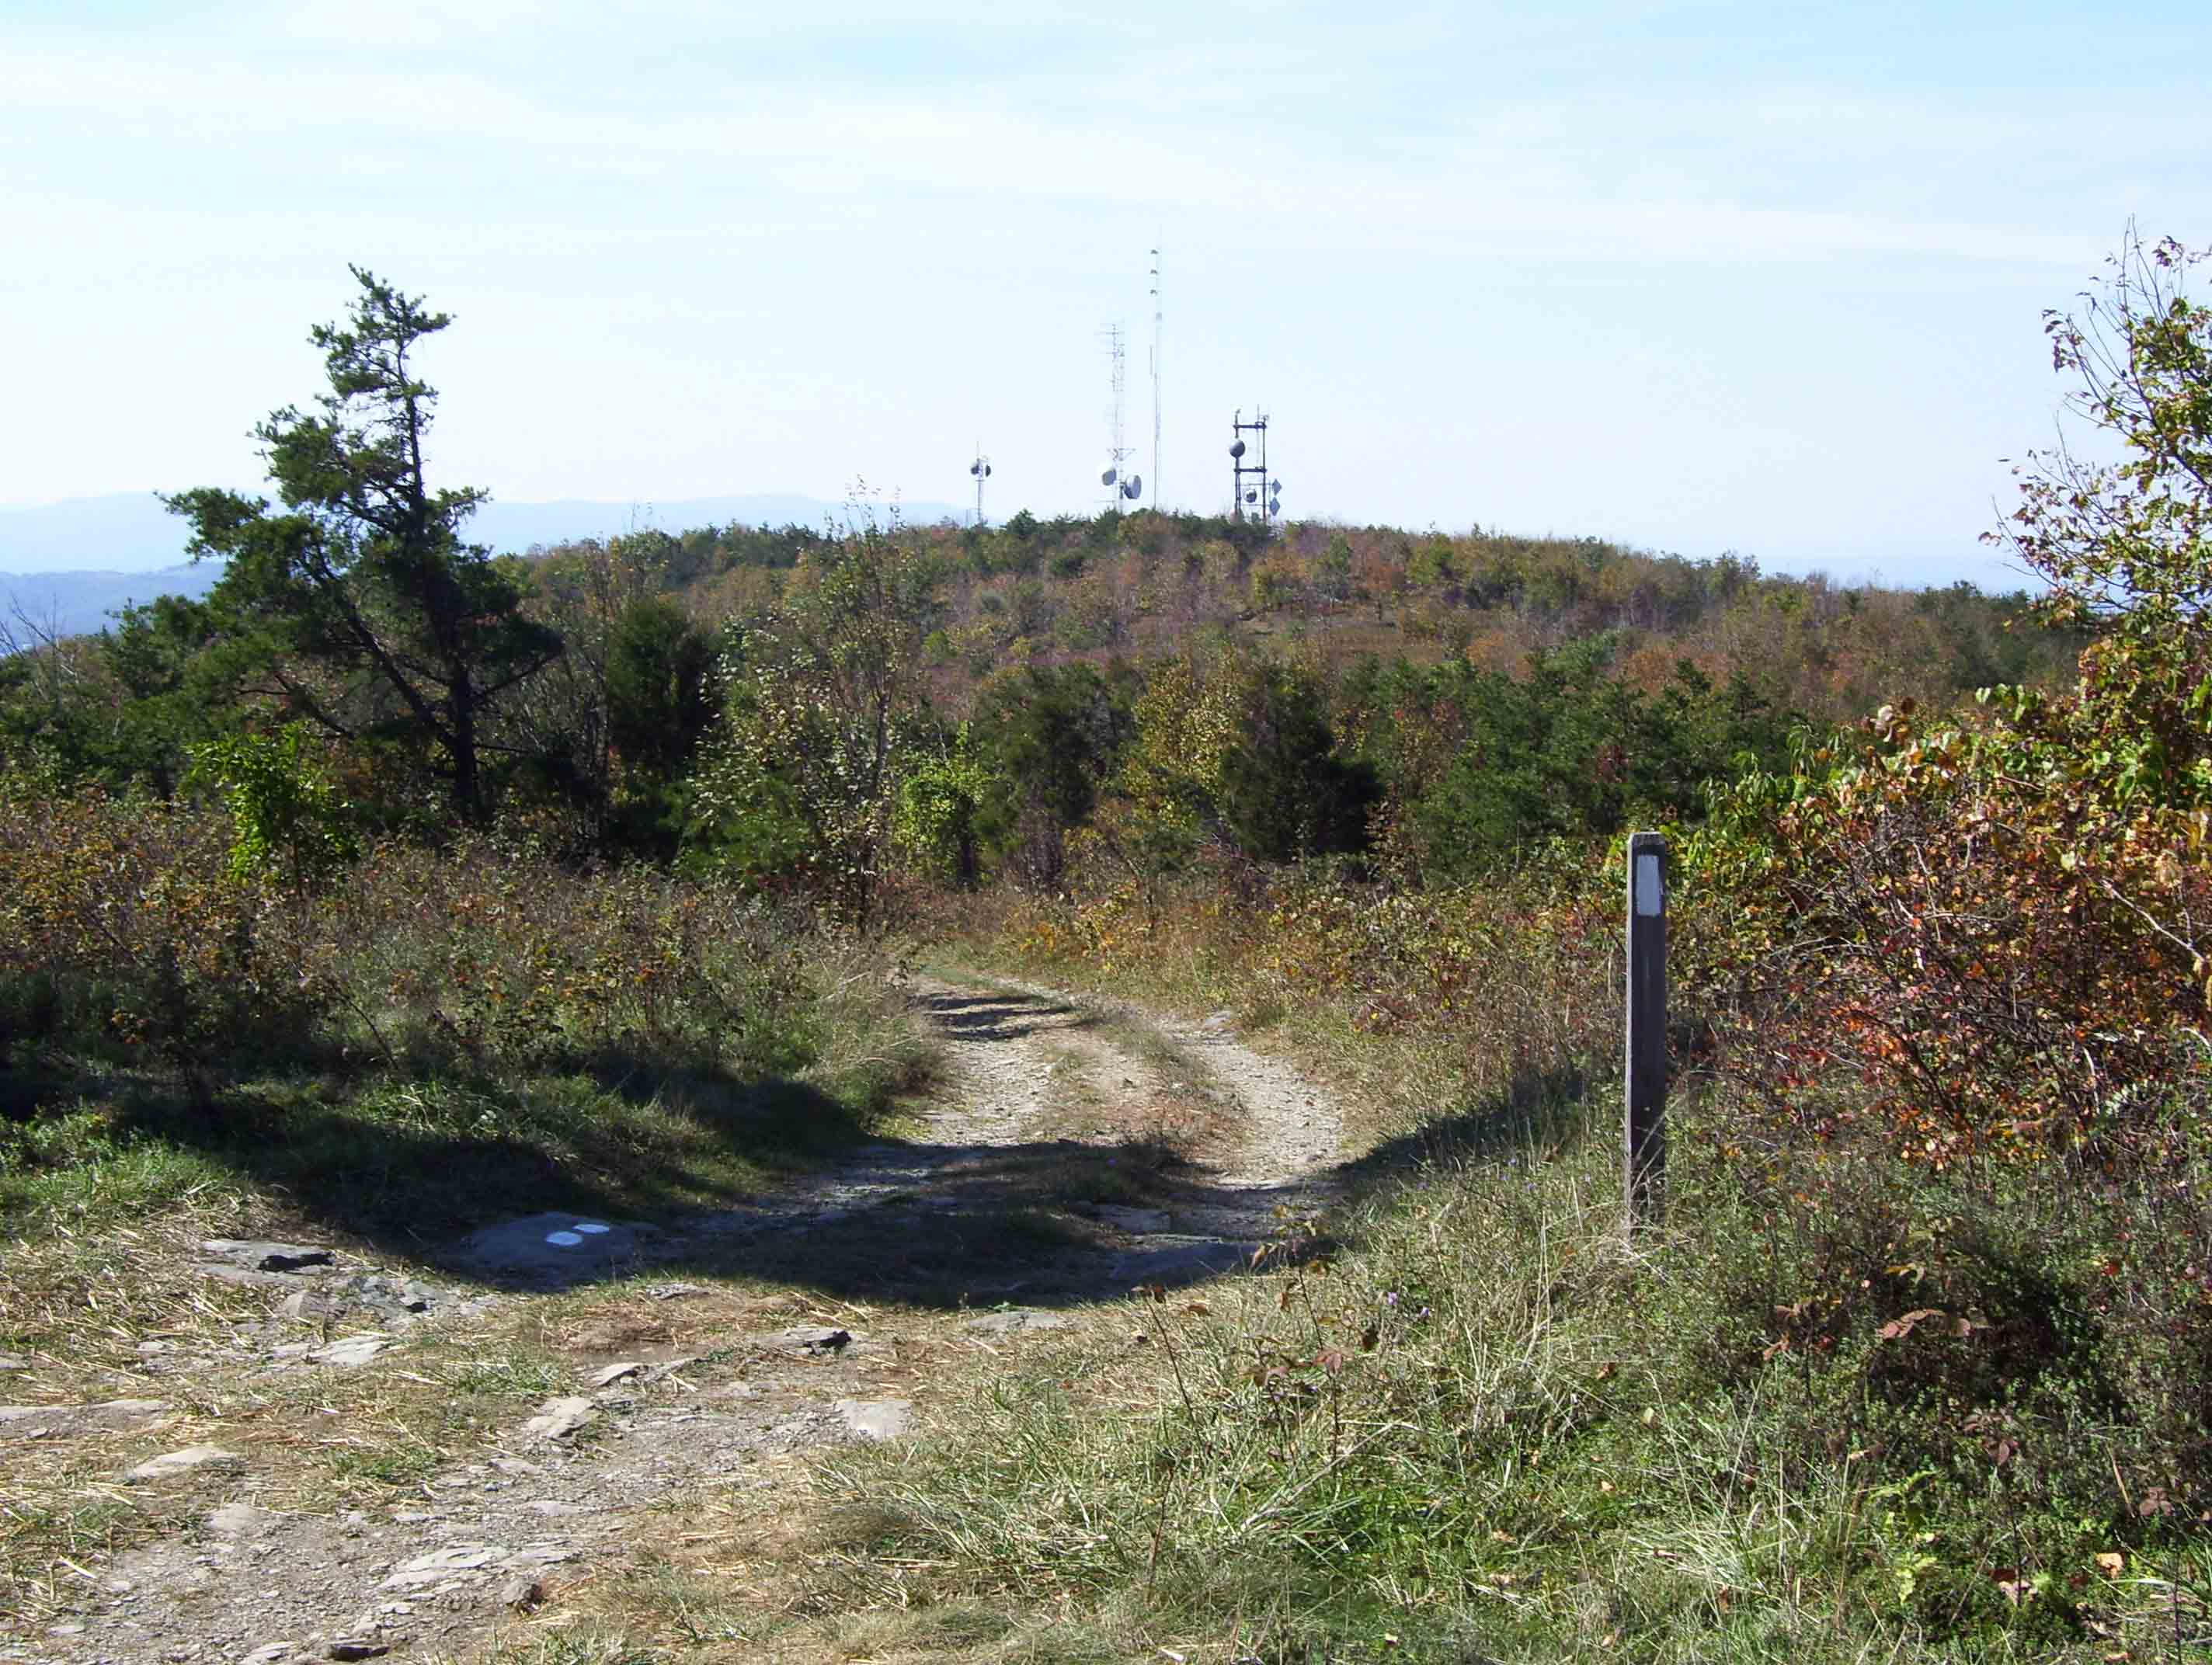 The trail along the summit of Bears Den Mt. Much of this section of the AT is outside the national park which is why communication towers dot the summit. Taken from MM 3.0.  Courtesy dlcul@conncoll.edu